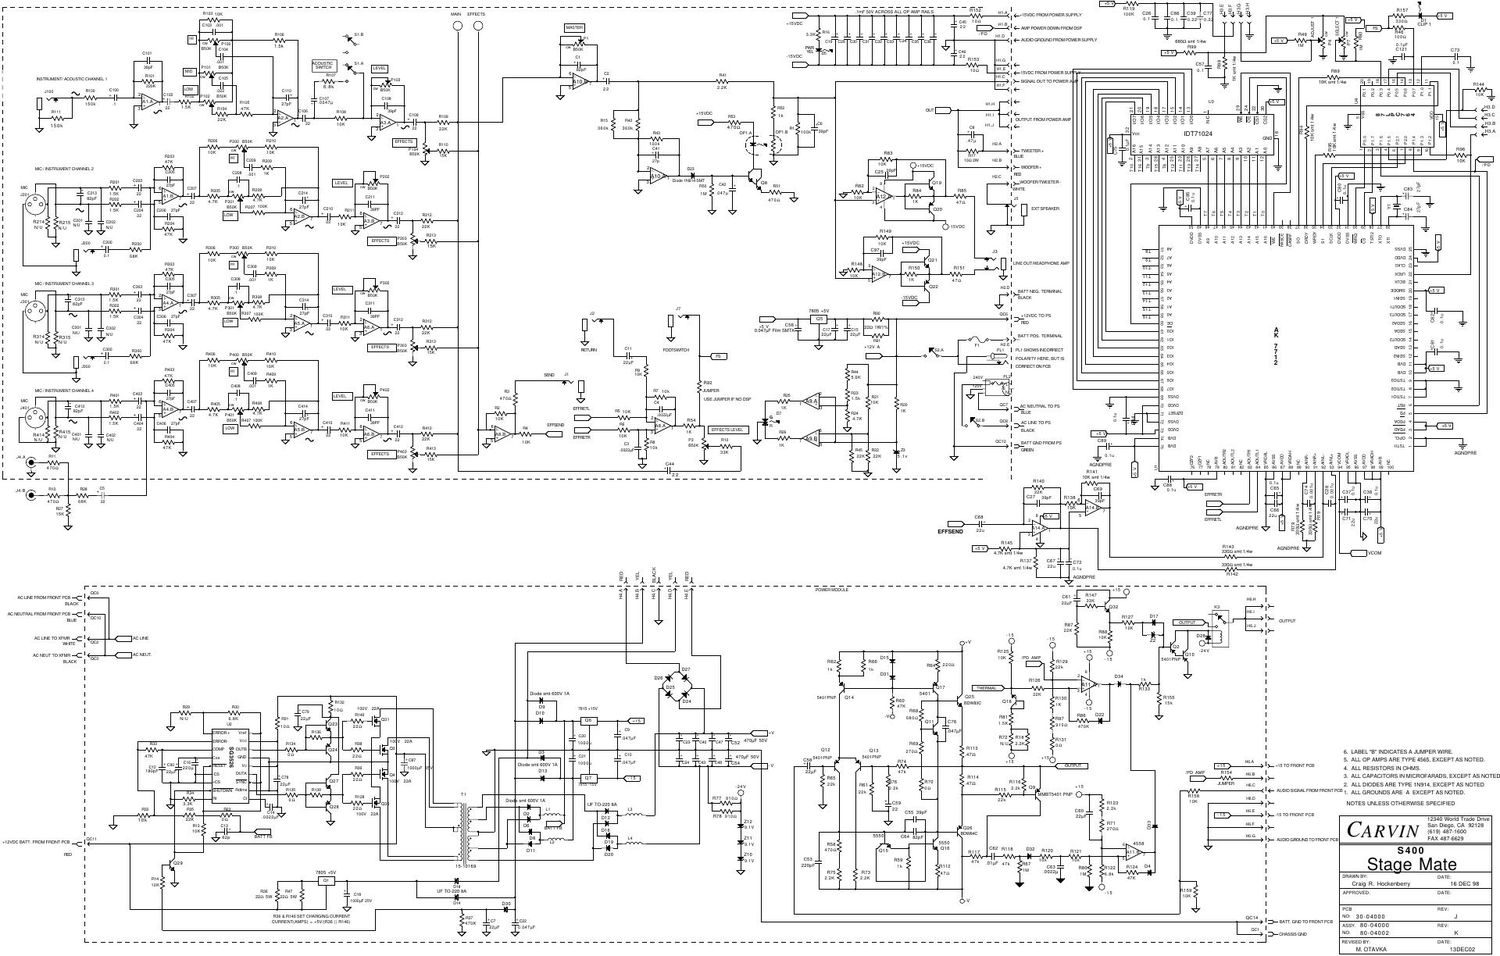 carvin s400 stage mate schematic